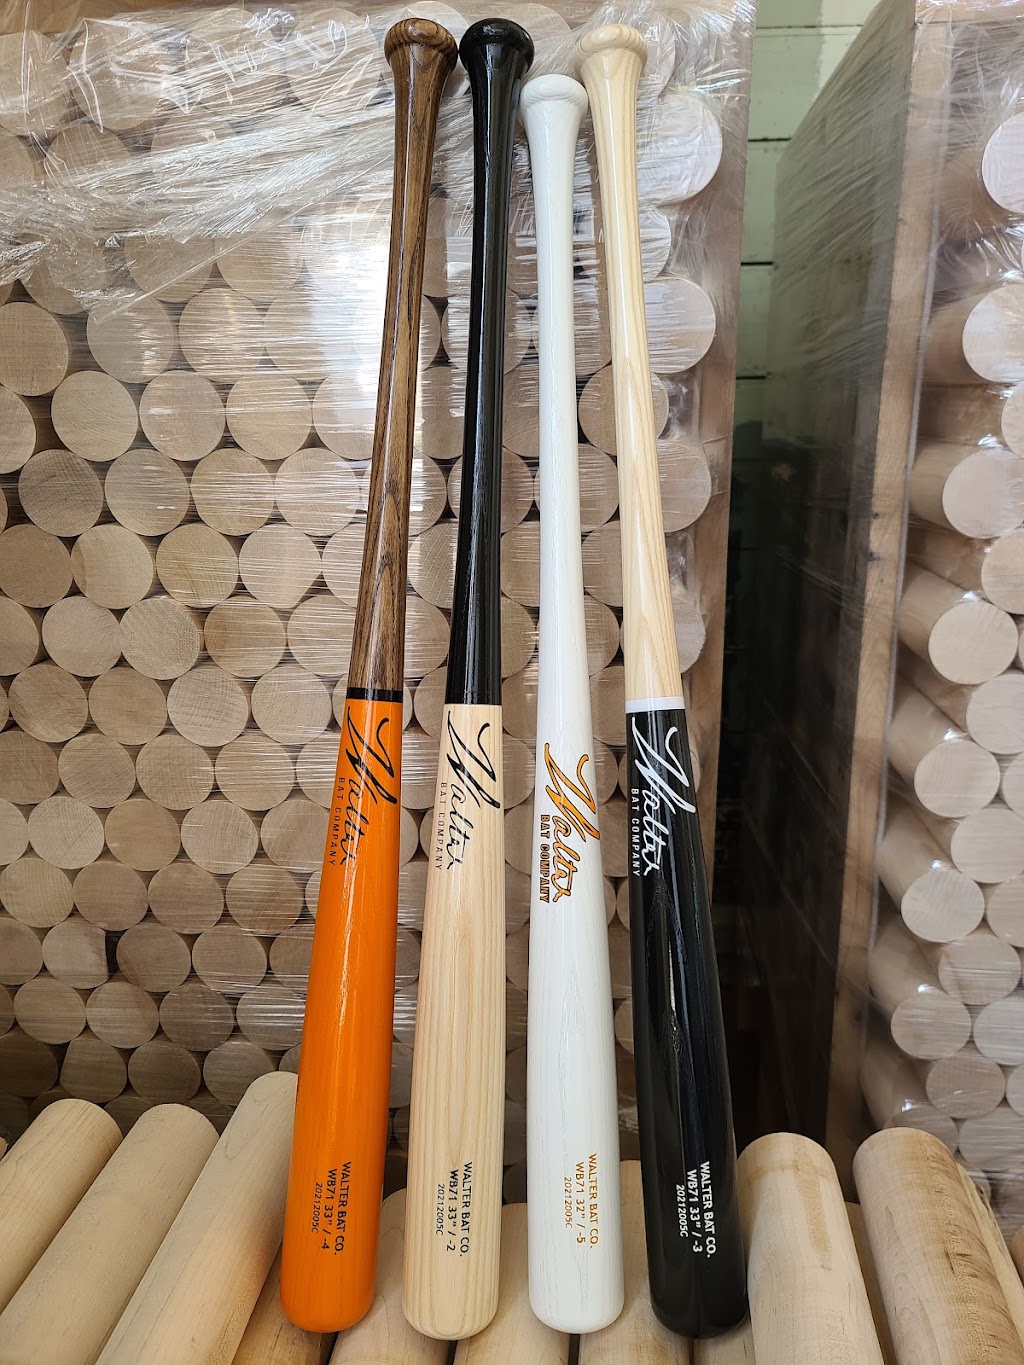 Walter Bat Company | On-line Only, 1 Pine St Ext, Nashua, NH 03060 | Phone: (603) 514-0681